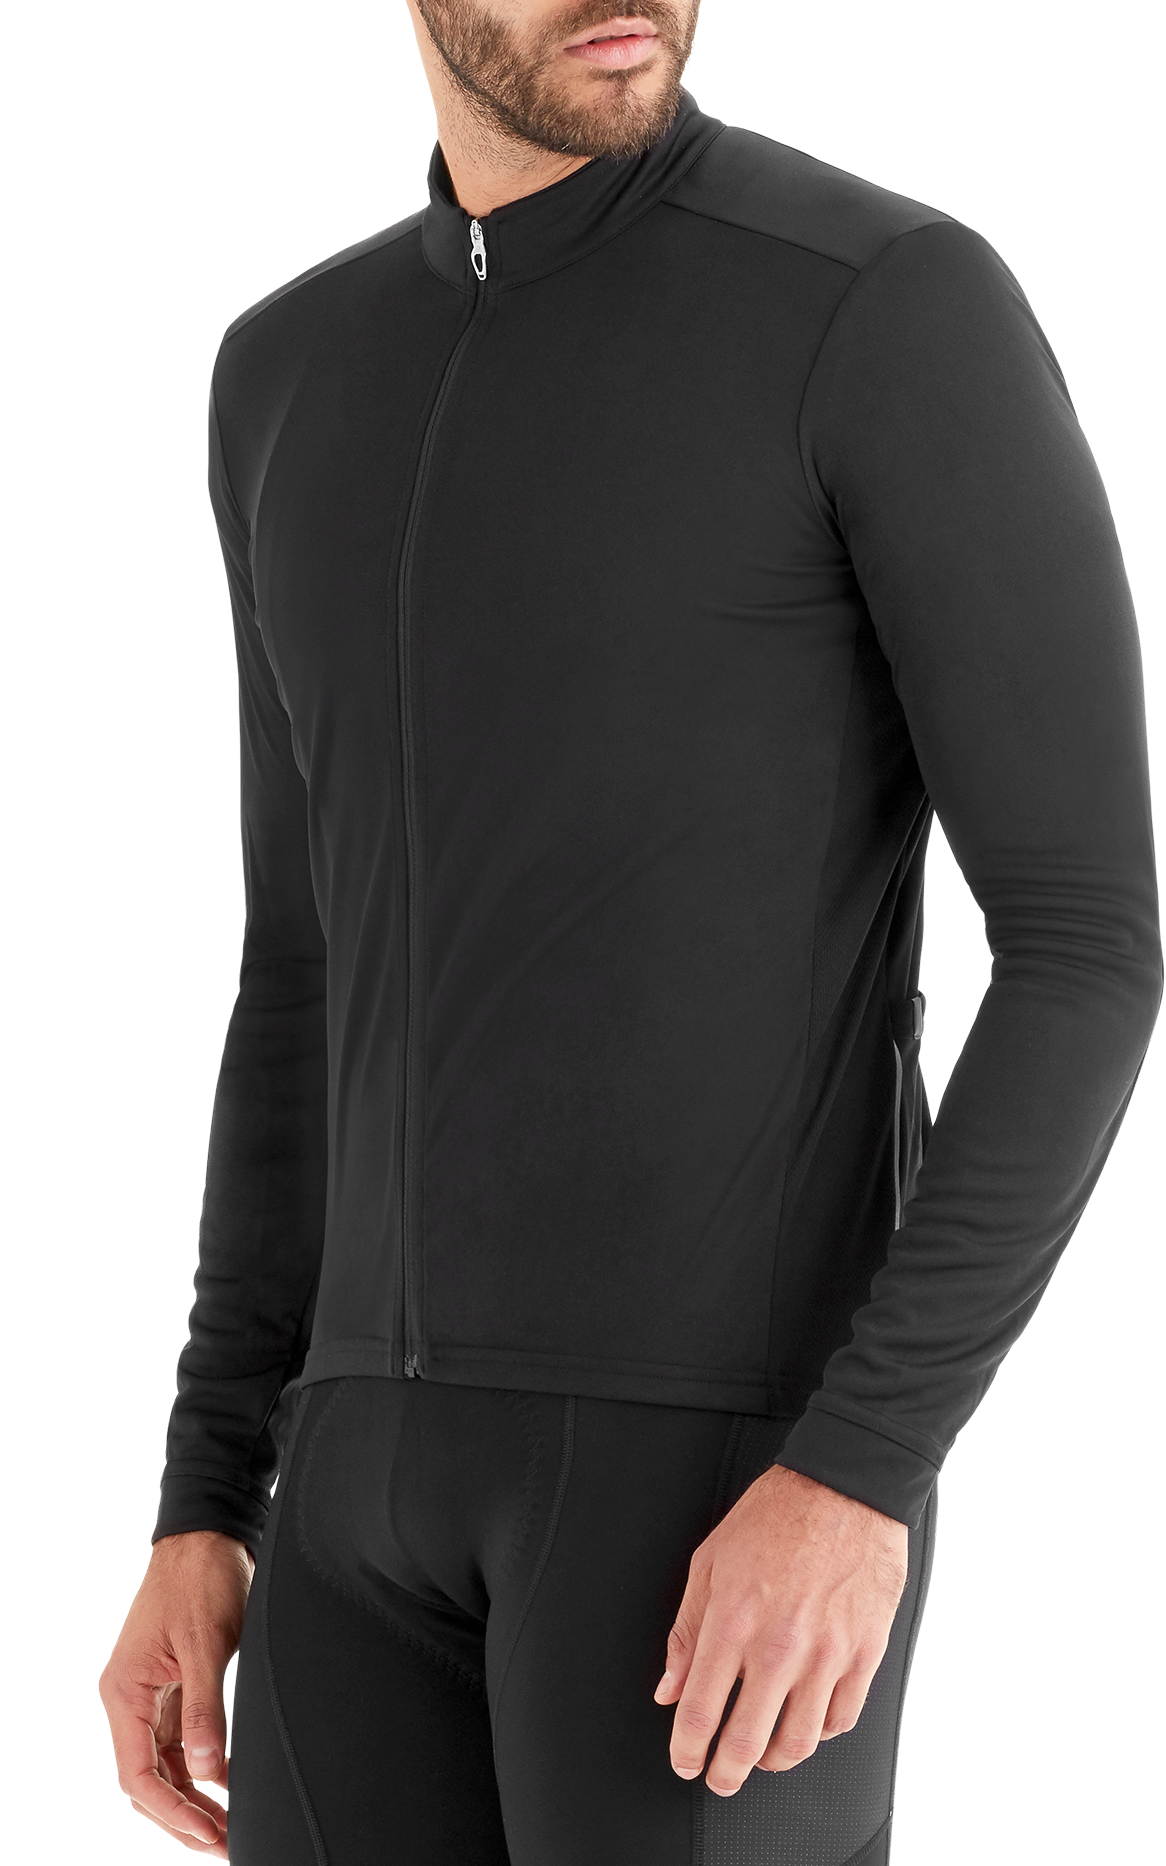 Specialized RBX Expert Thermal Long Sleeve Jersey review - great build  quality that's let down by short sleeves